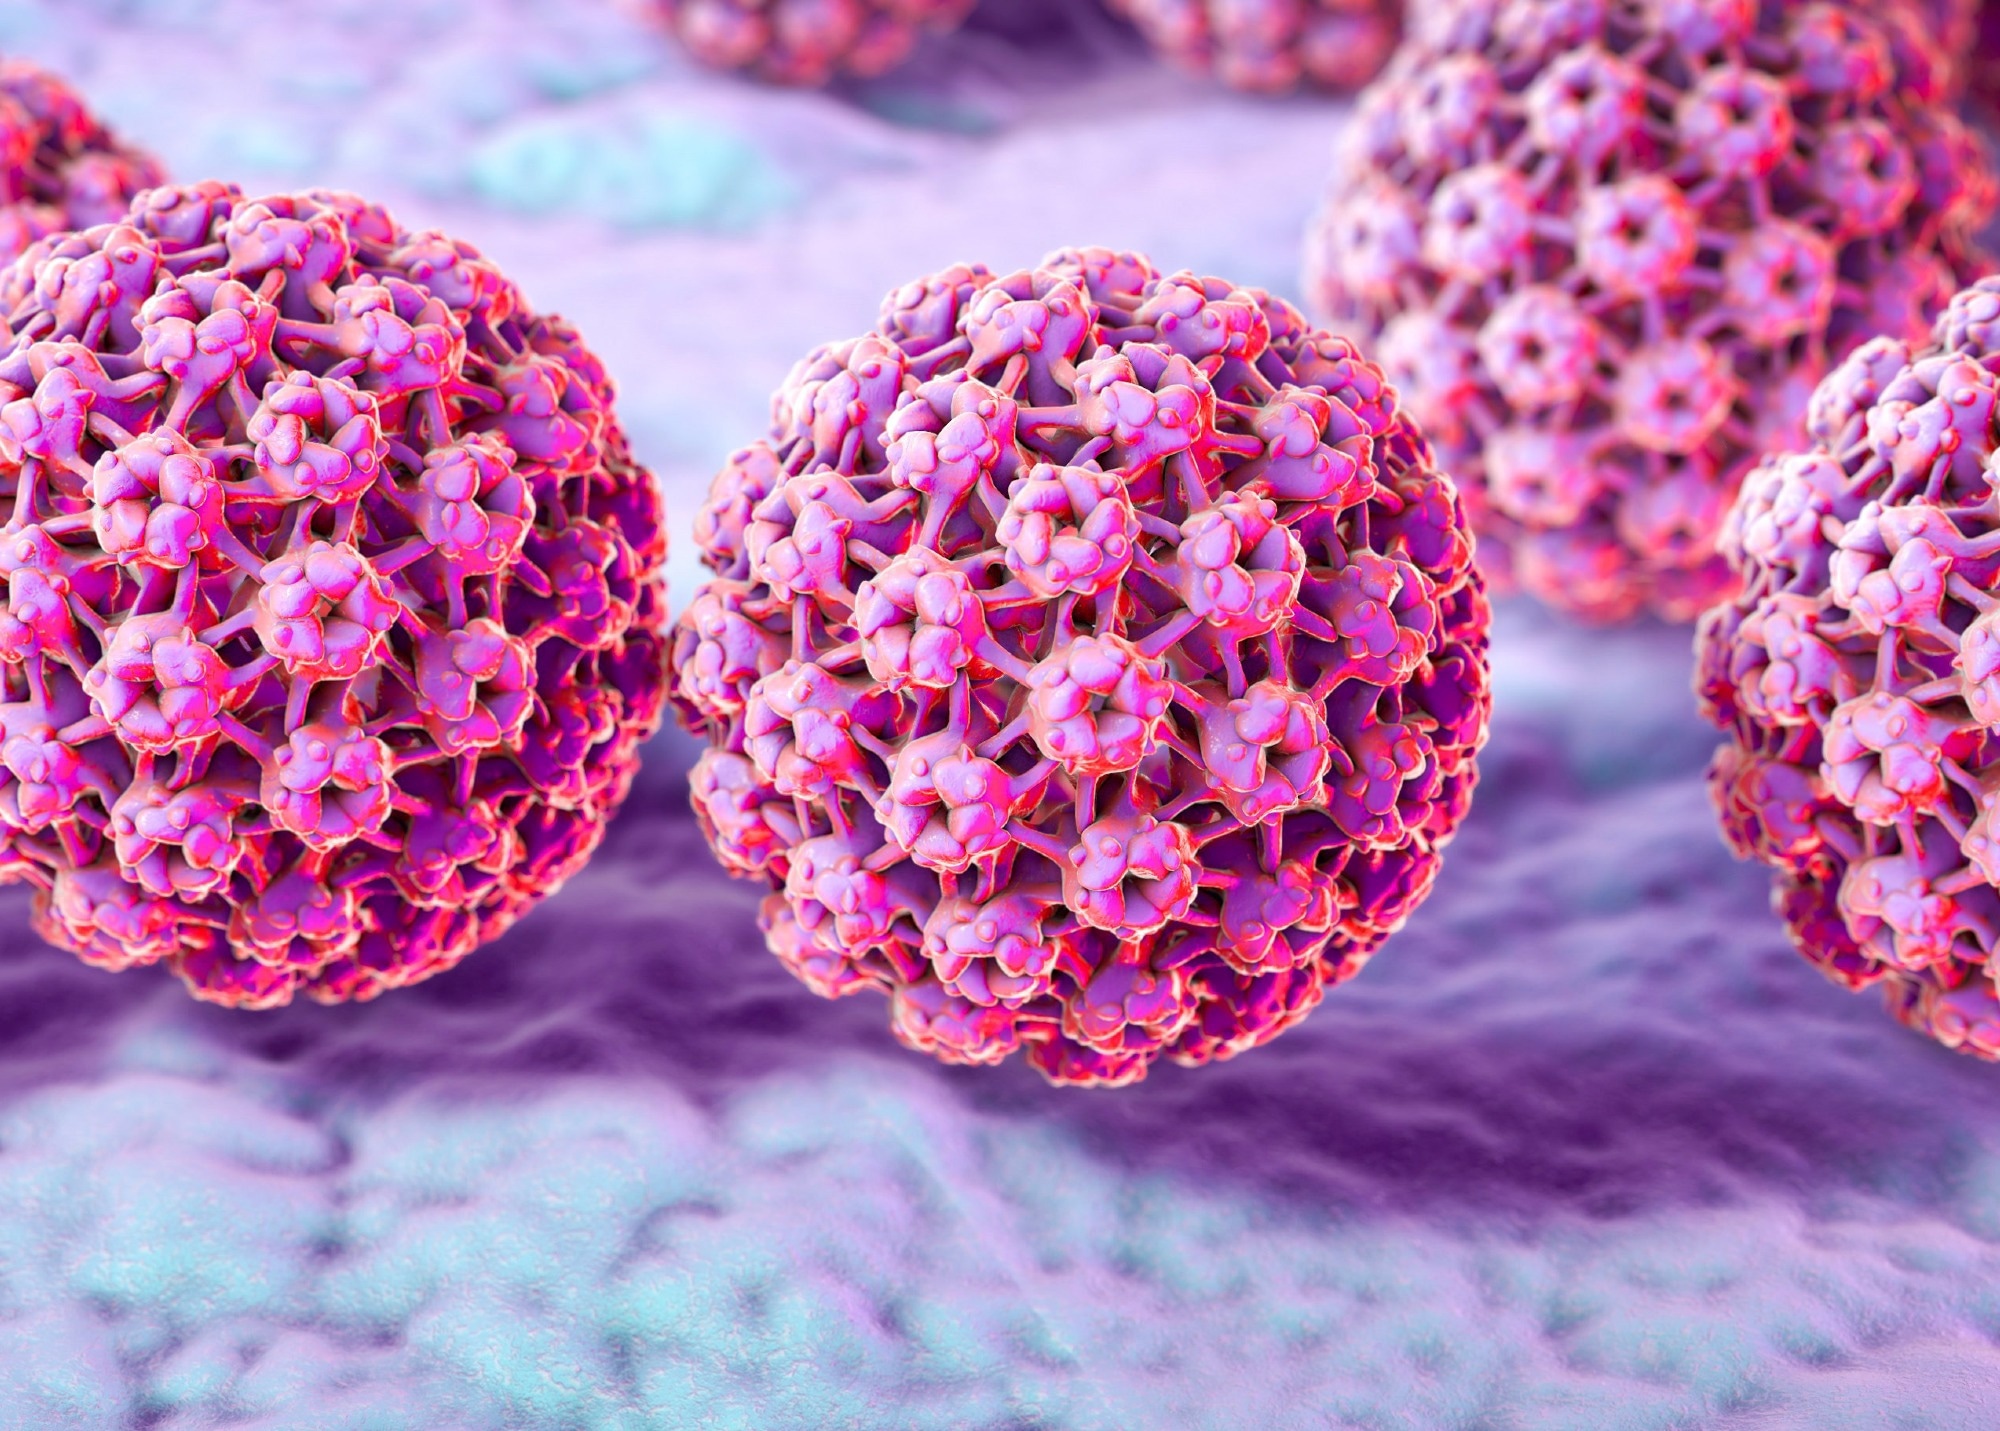 HPV and metabolic syndrome combo linked to higher mortality risk in women